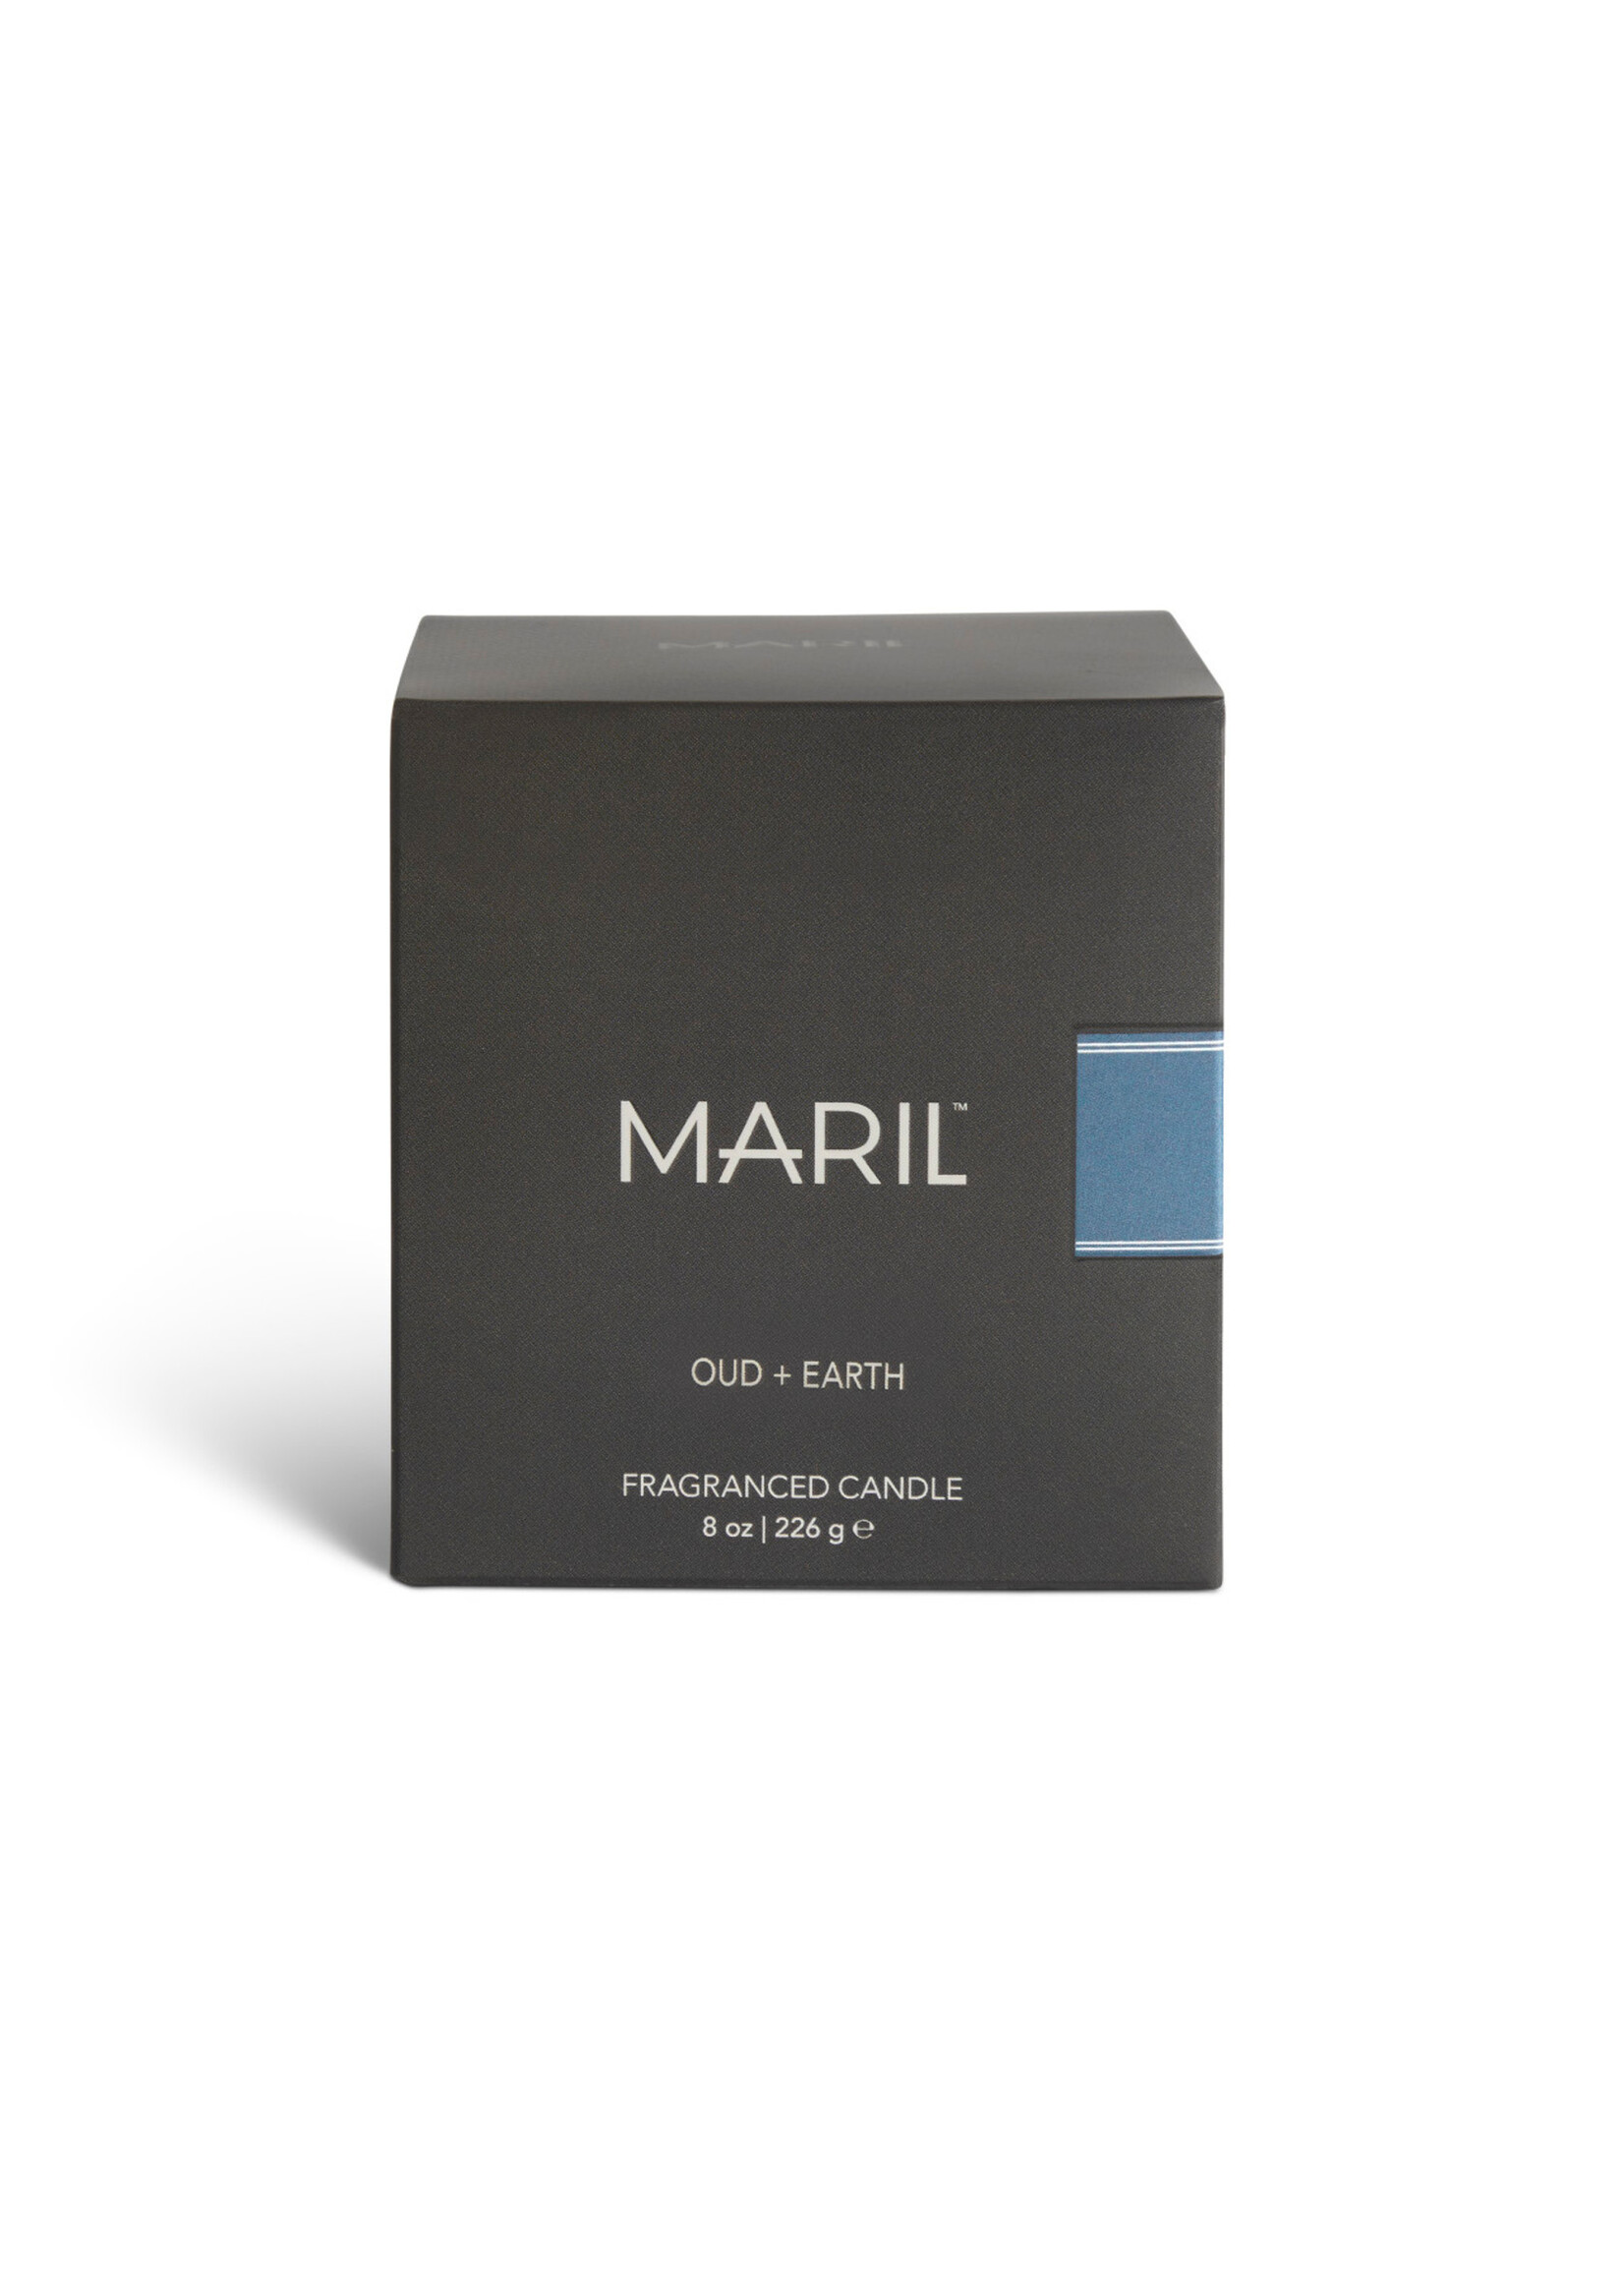 Maril Oud + Earth 8 oz. Candle